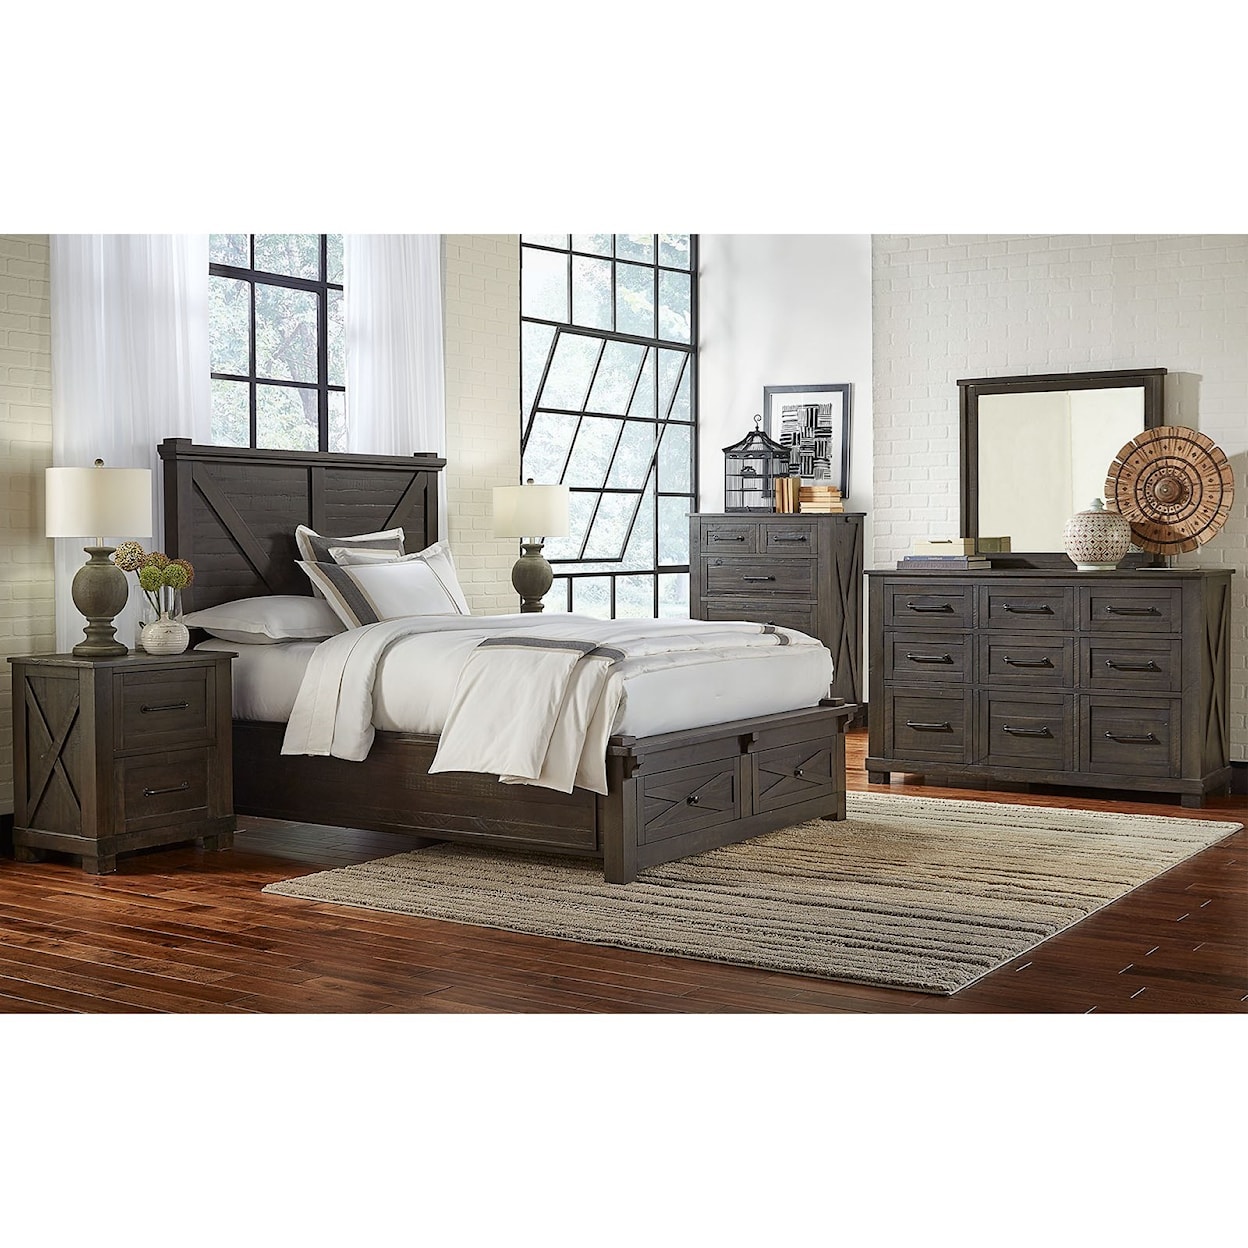 A-A Sun Valley Queen Bed with Footboard Bench